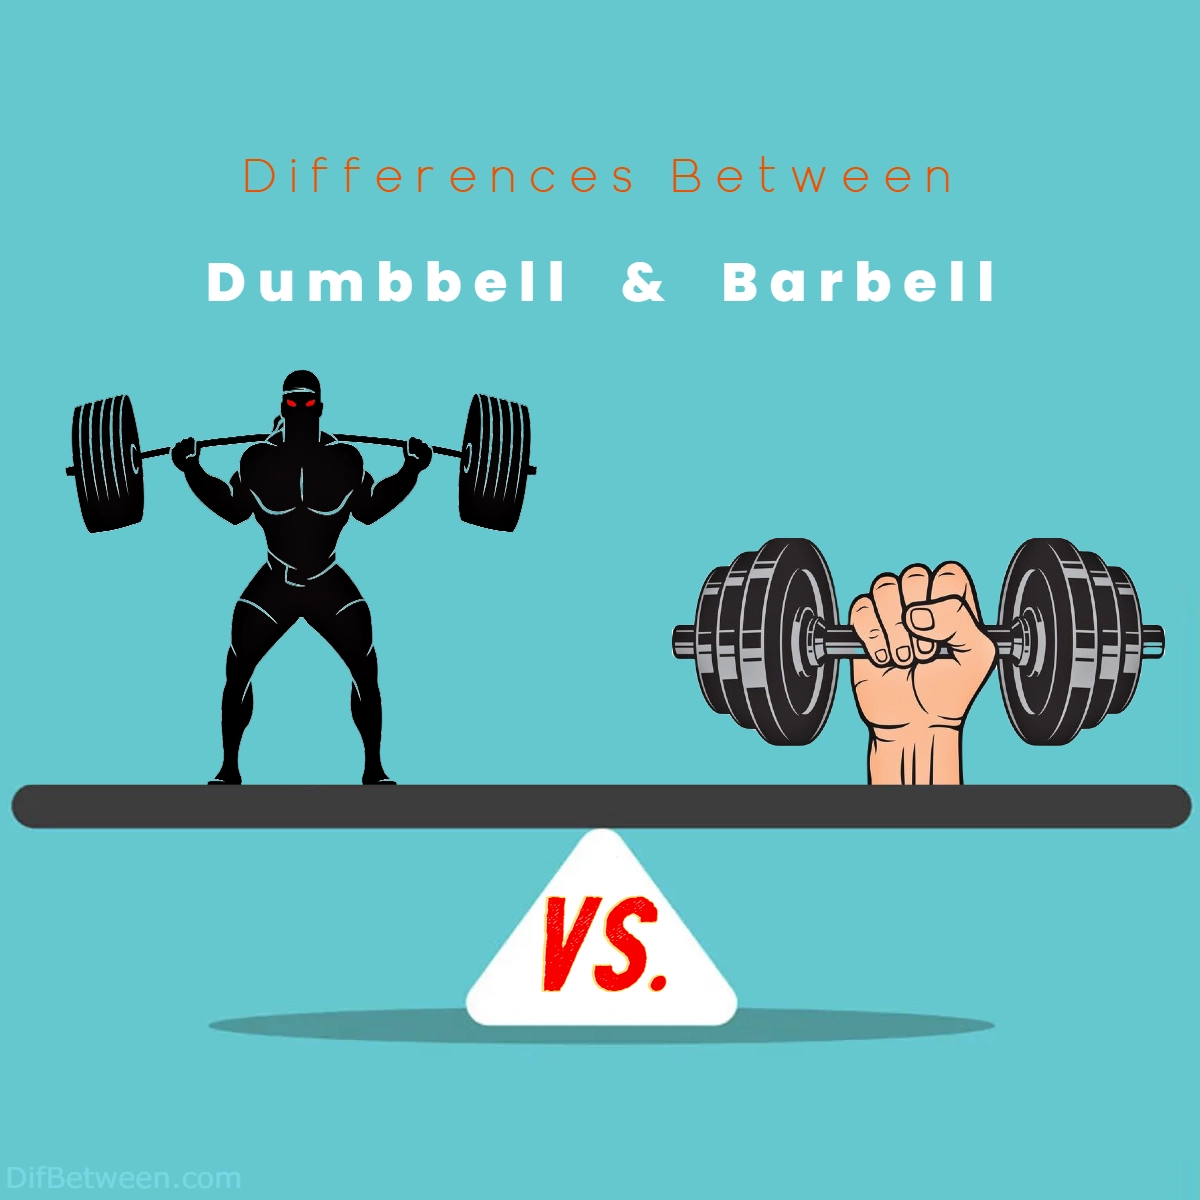 Difference Between Dumbbell and Barbell